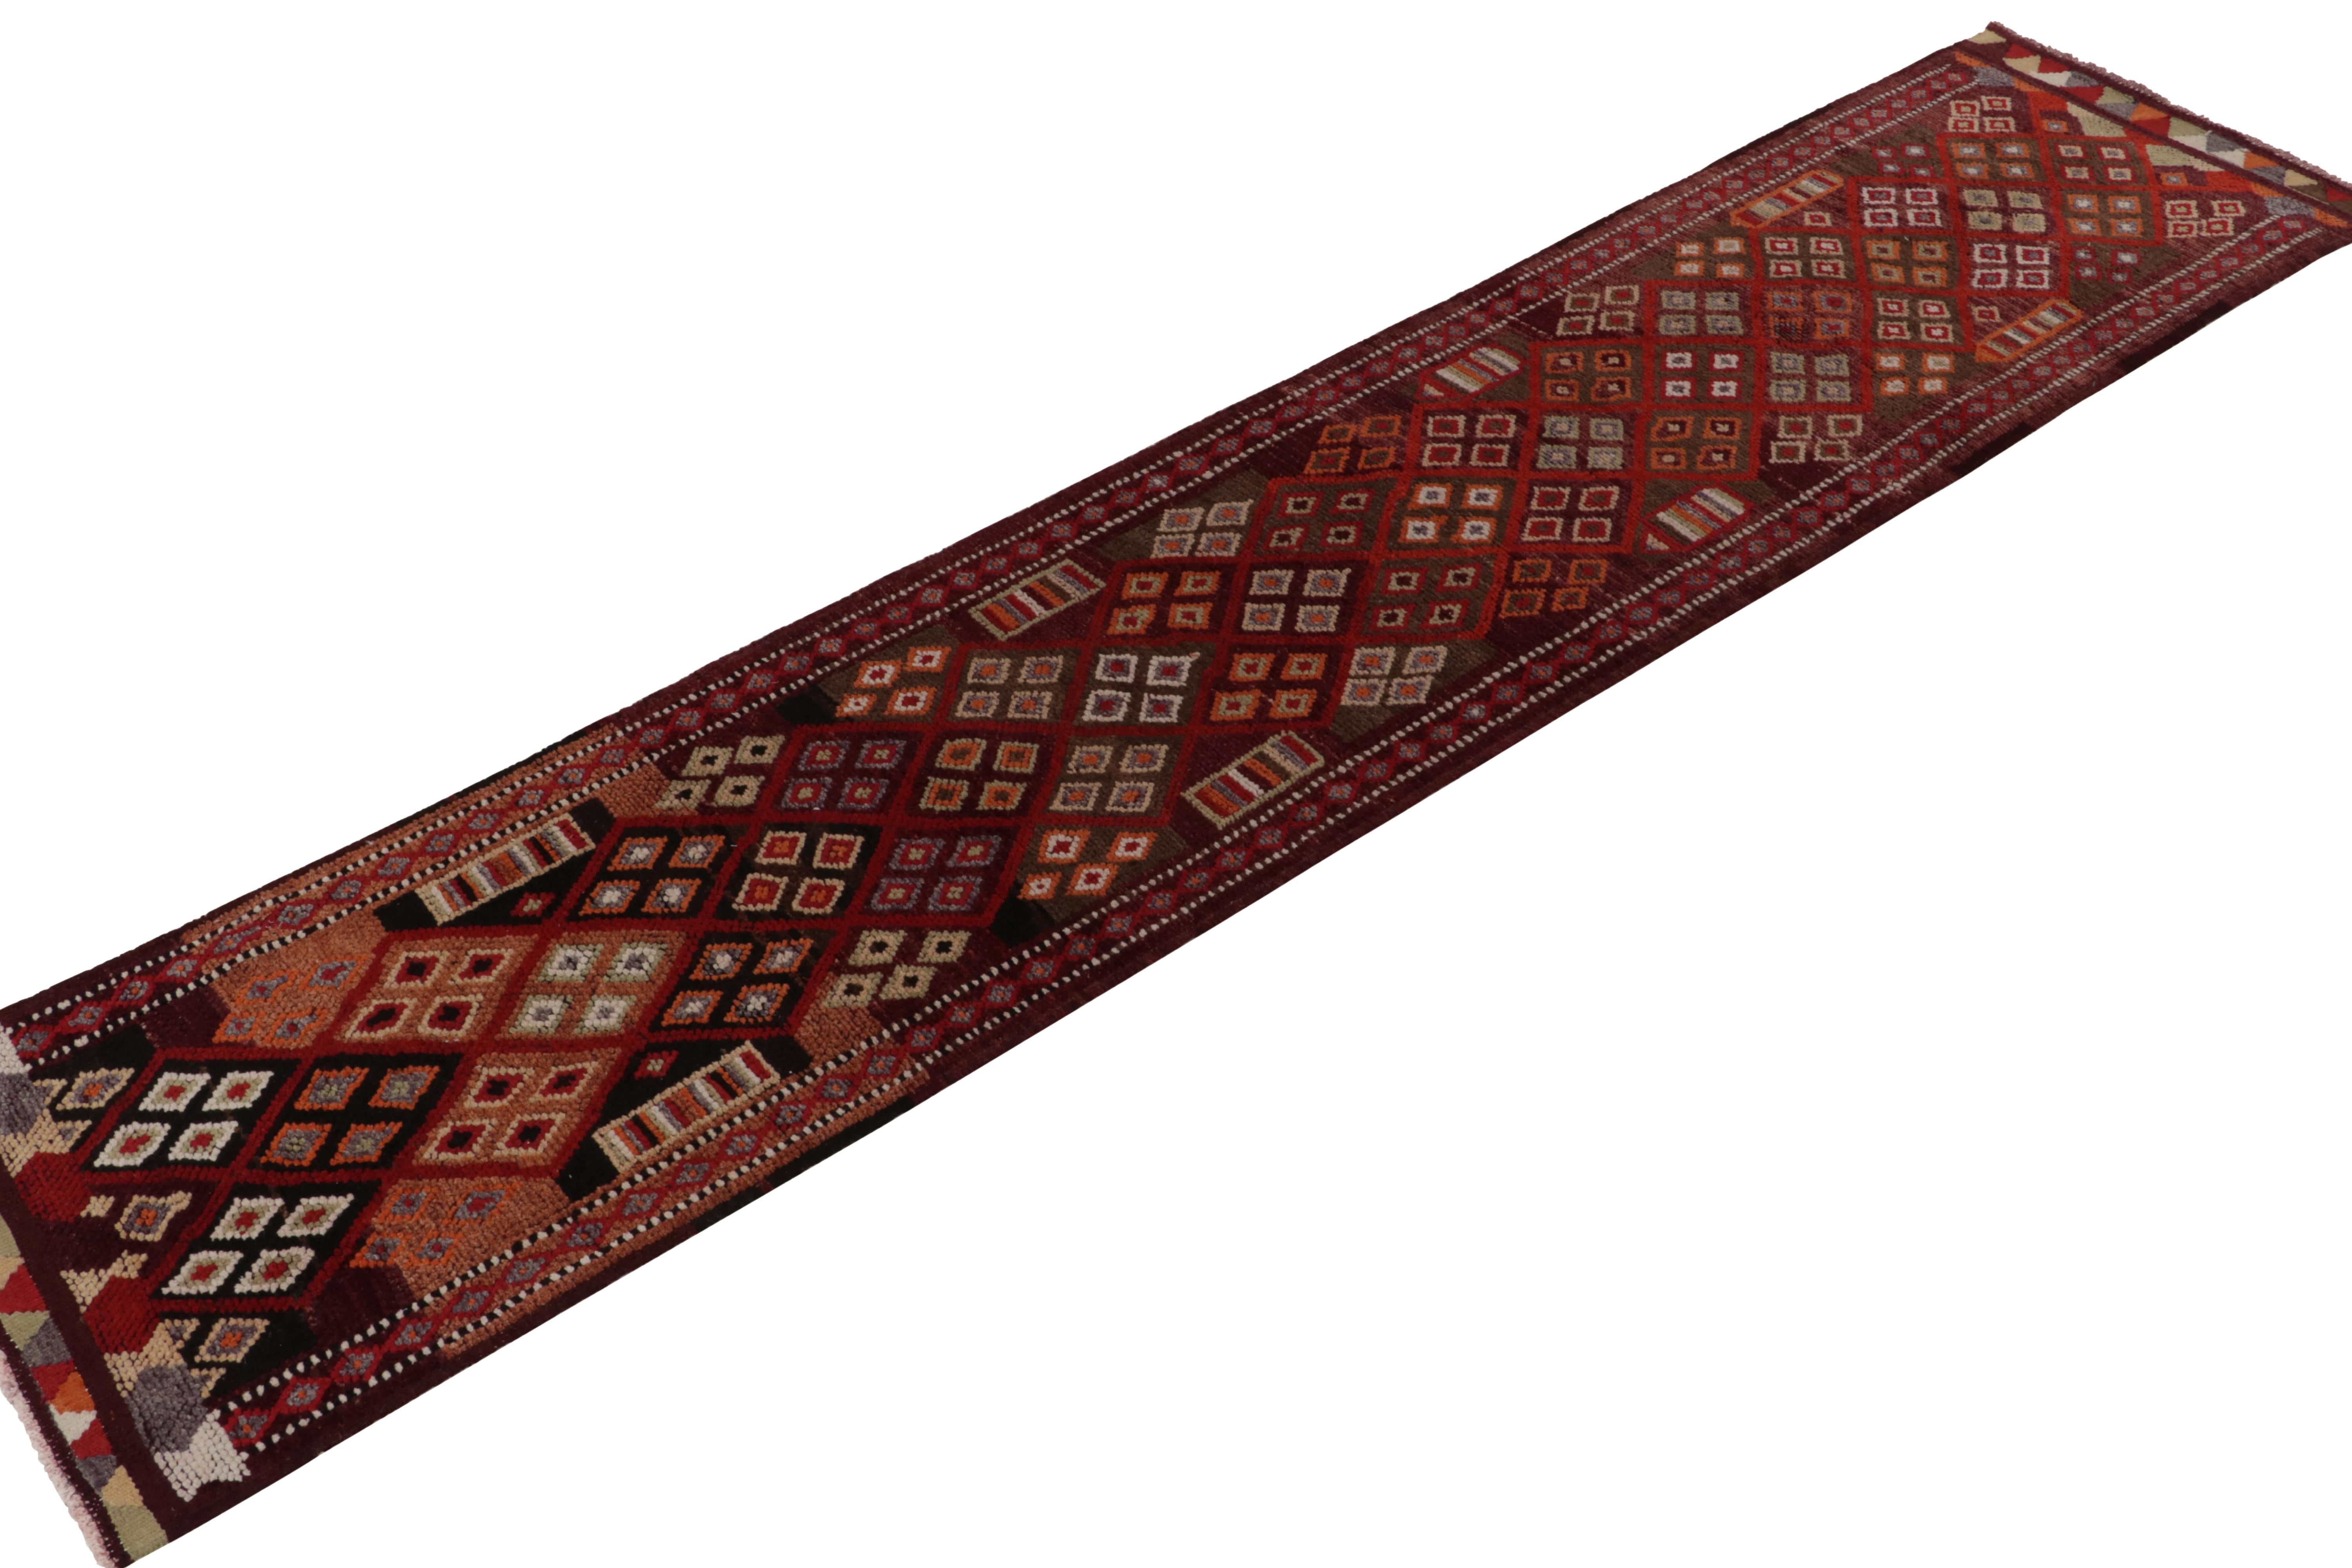 This mid-century 3x14 runner hails from a profound curation of vintage Turkish tribal rugs, hand-knotted in wool circa 1950-1960. 

The design favors rich, sanguine red with underlying brown towns, accented by black and orange among many varied